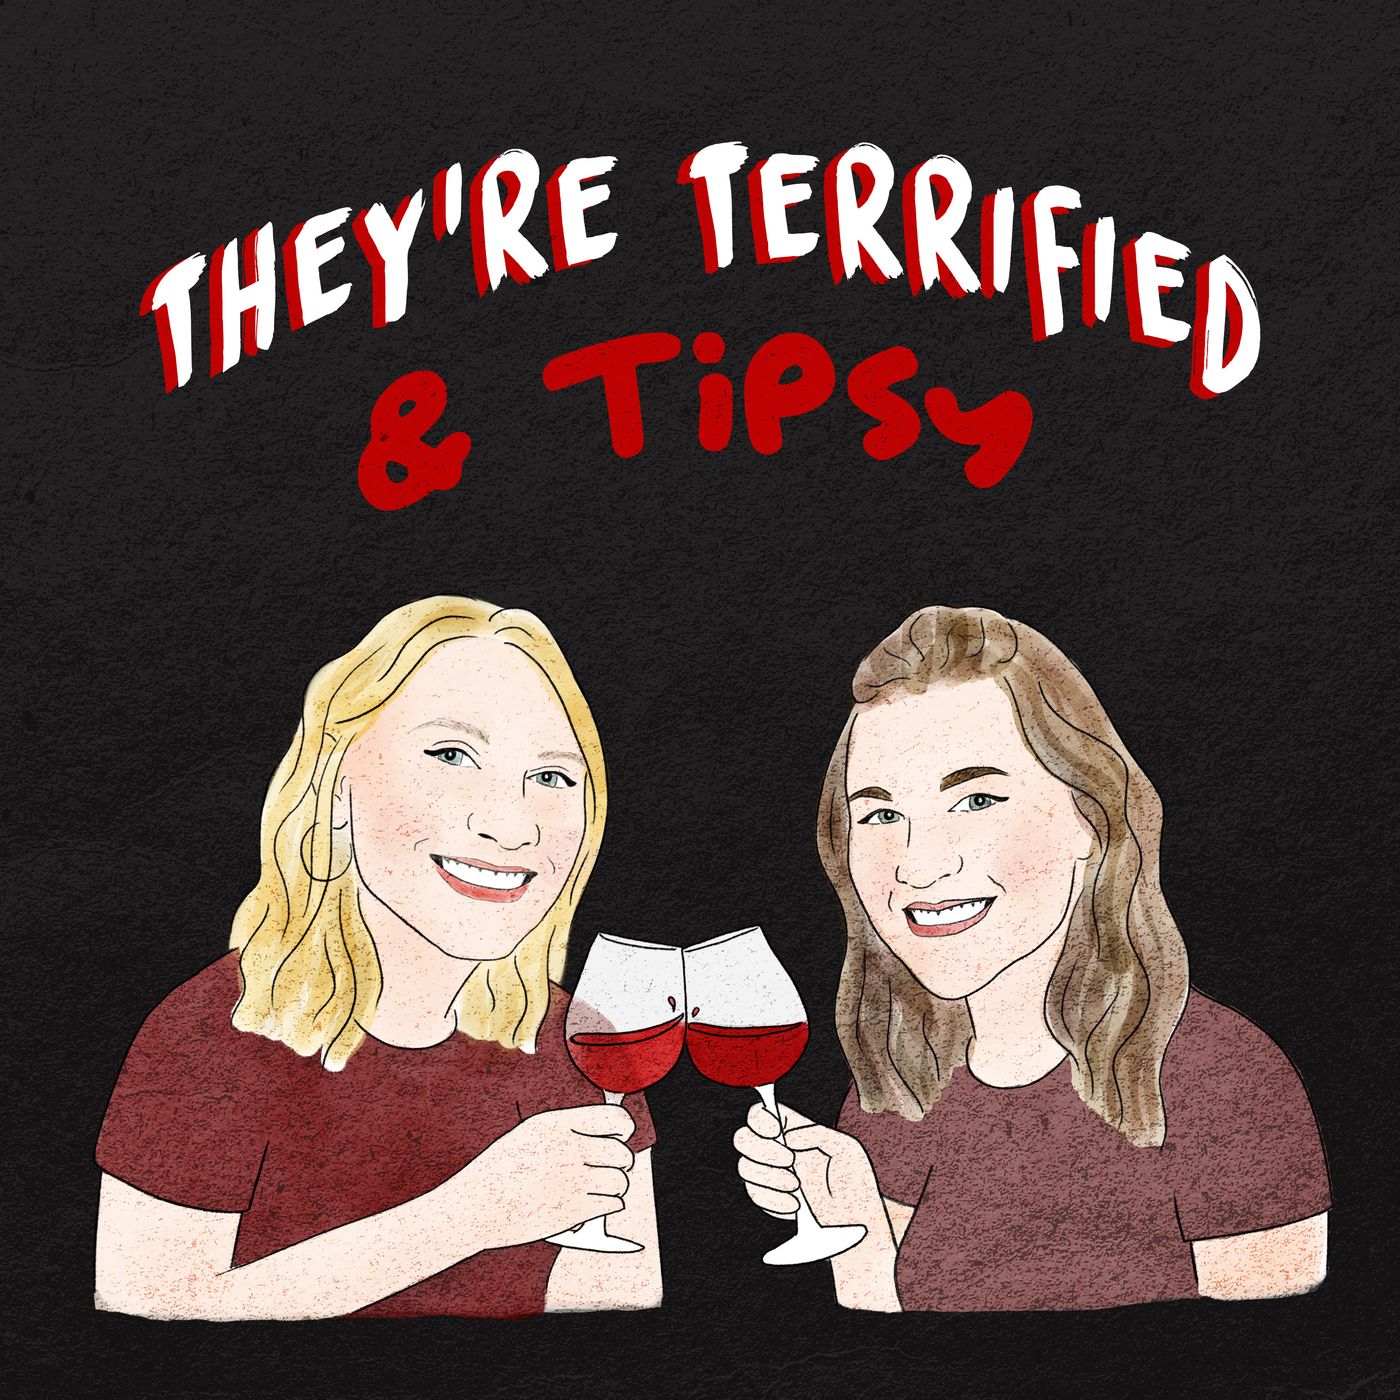 Introducing: They're Terrified & Tipsy